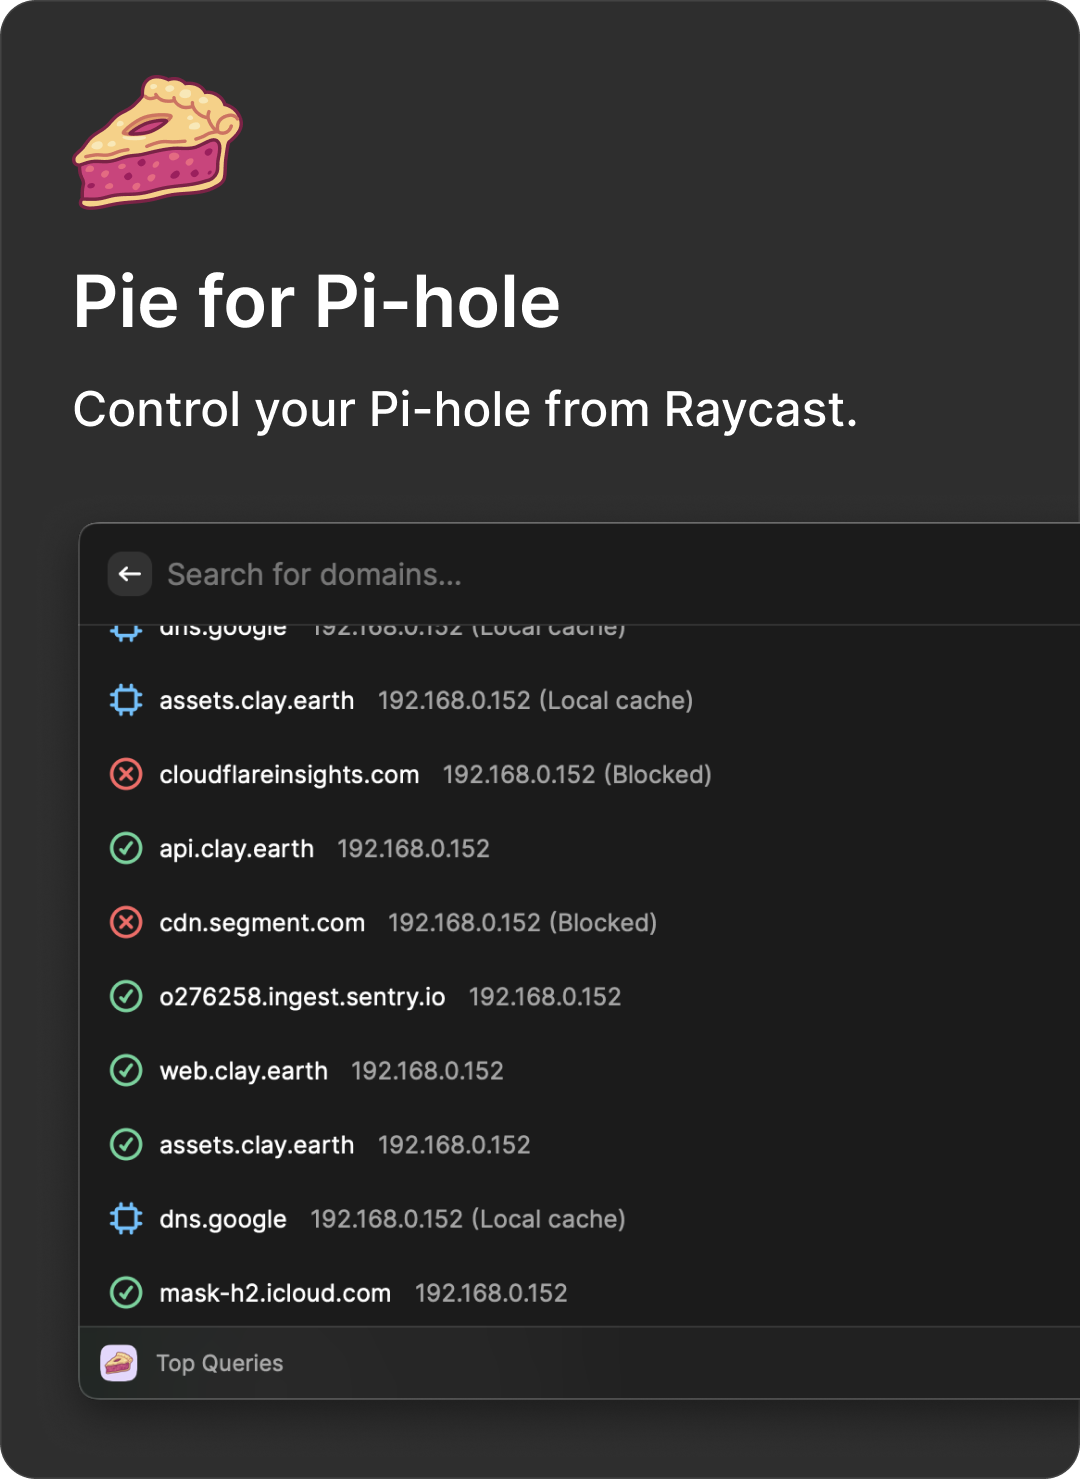 Pie for Pi-hole, a raycast extension